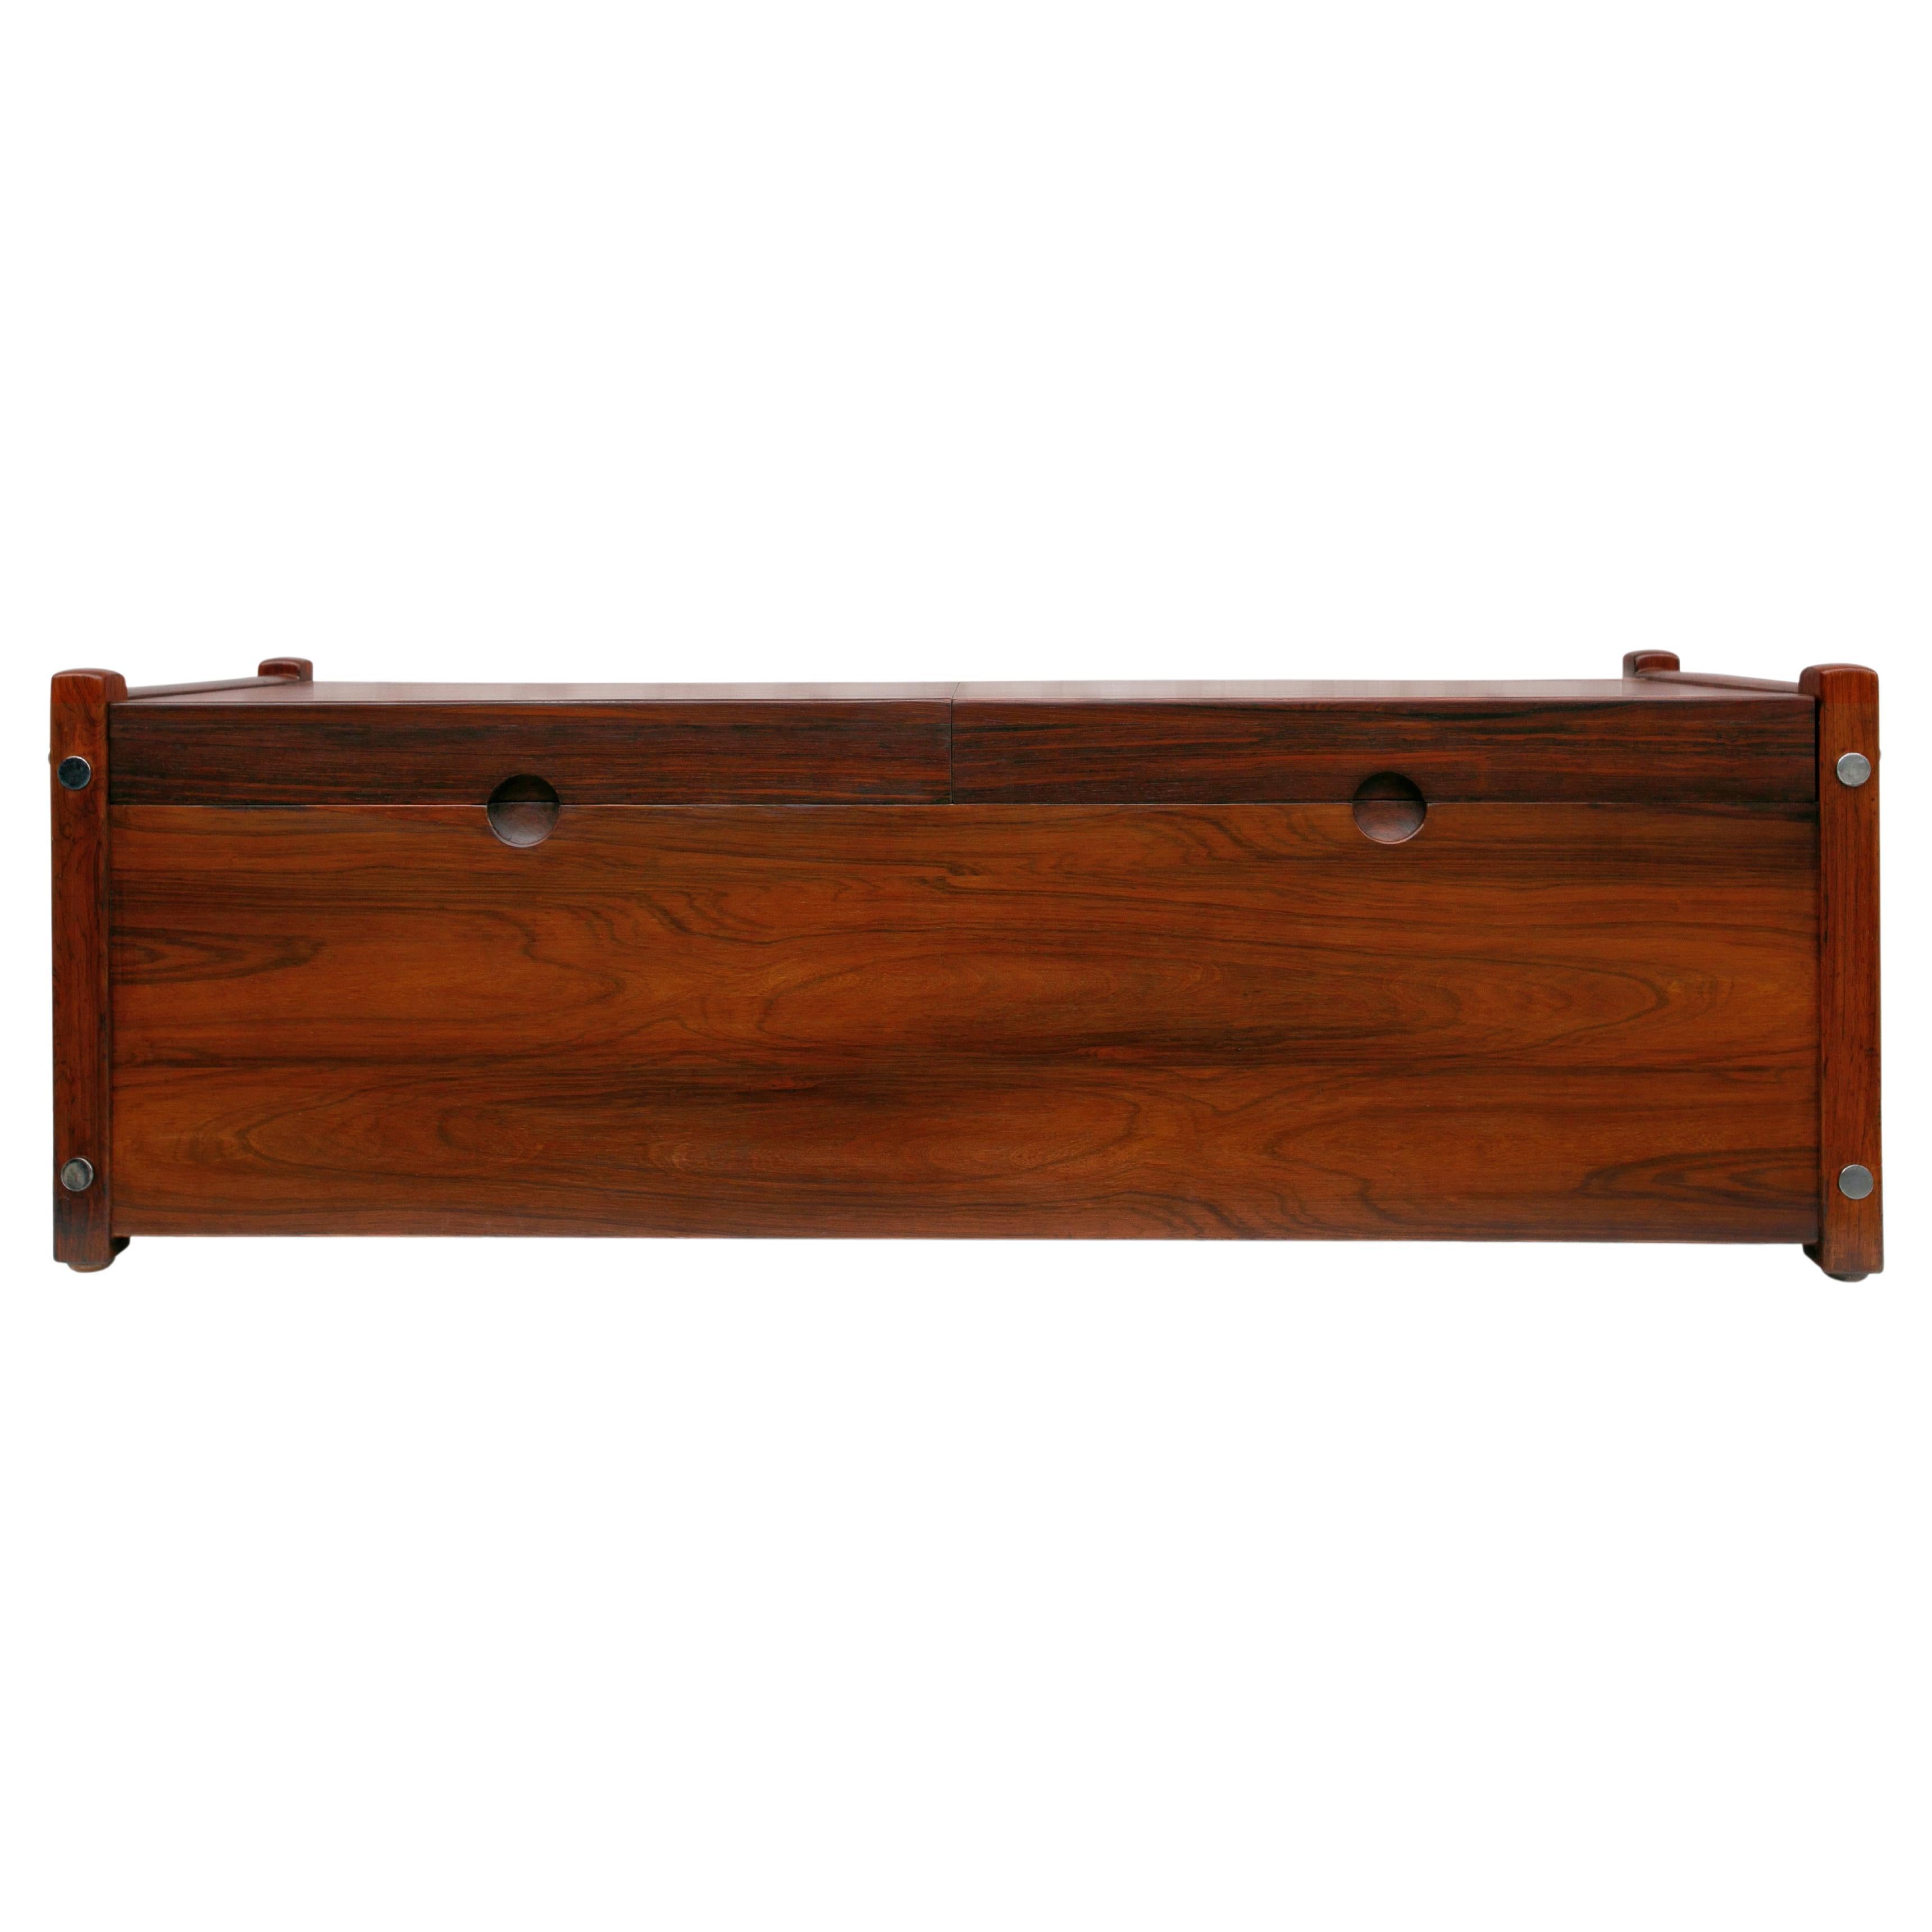 Available today, this spectacular Brazilian Modern Trunk model “Sabara” in Brazilian Rosewood, known as Jacaranda is nothing less than spectacular!
 
The 